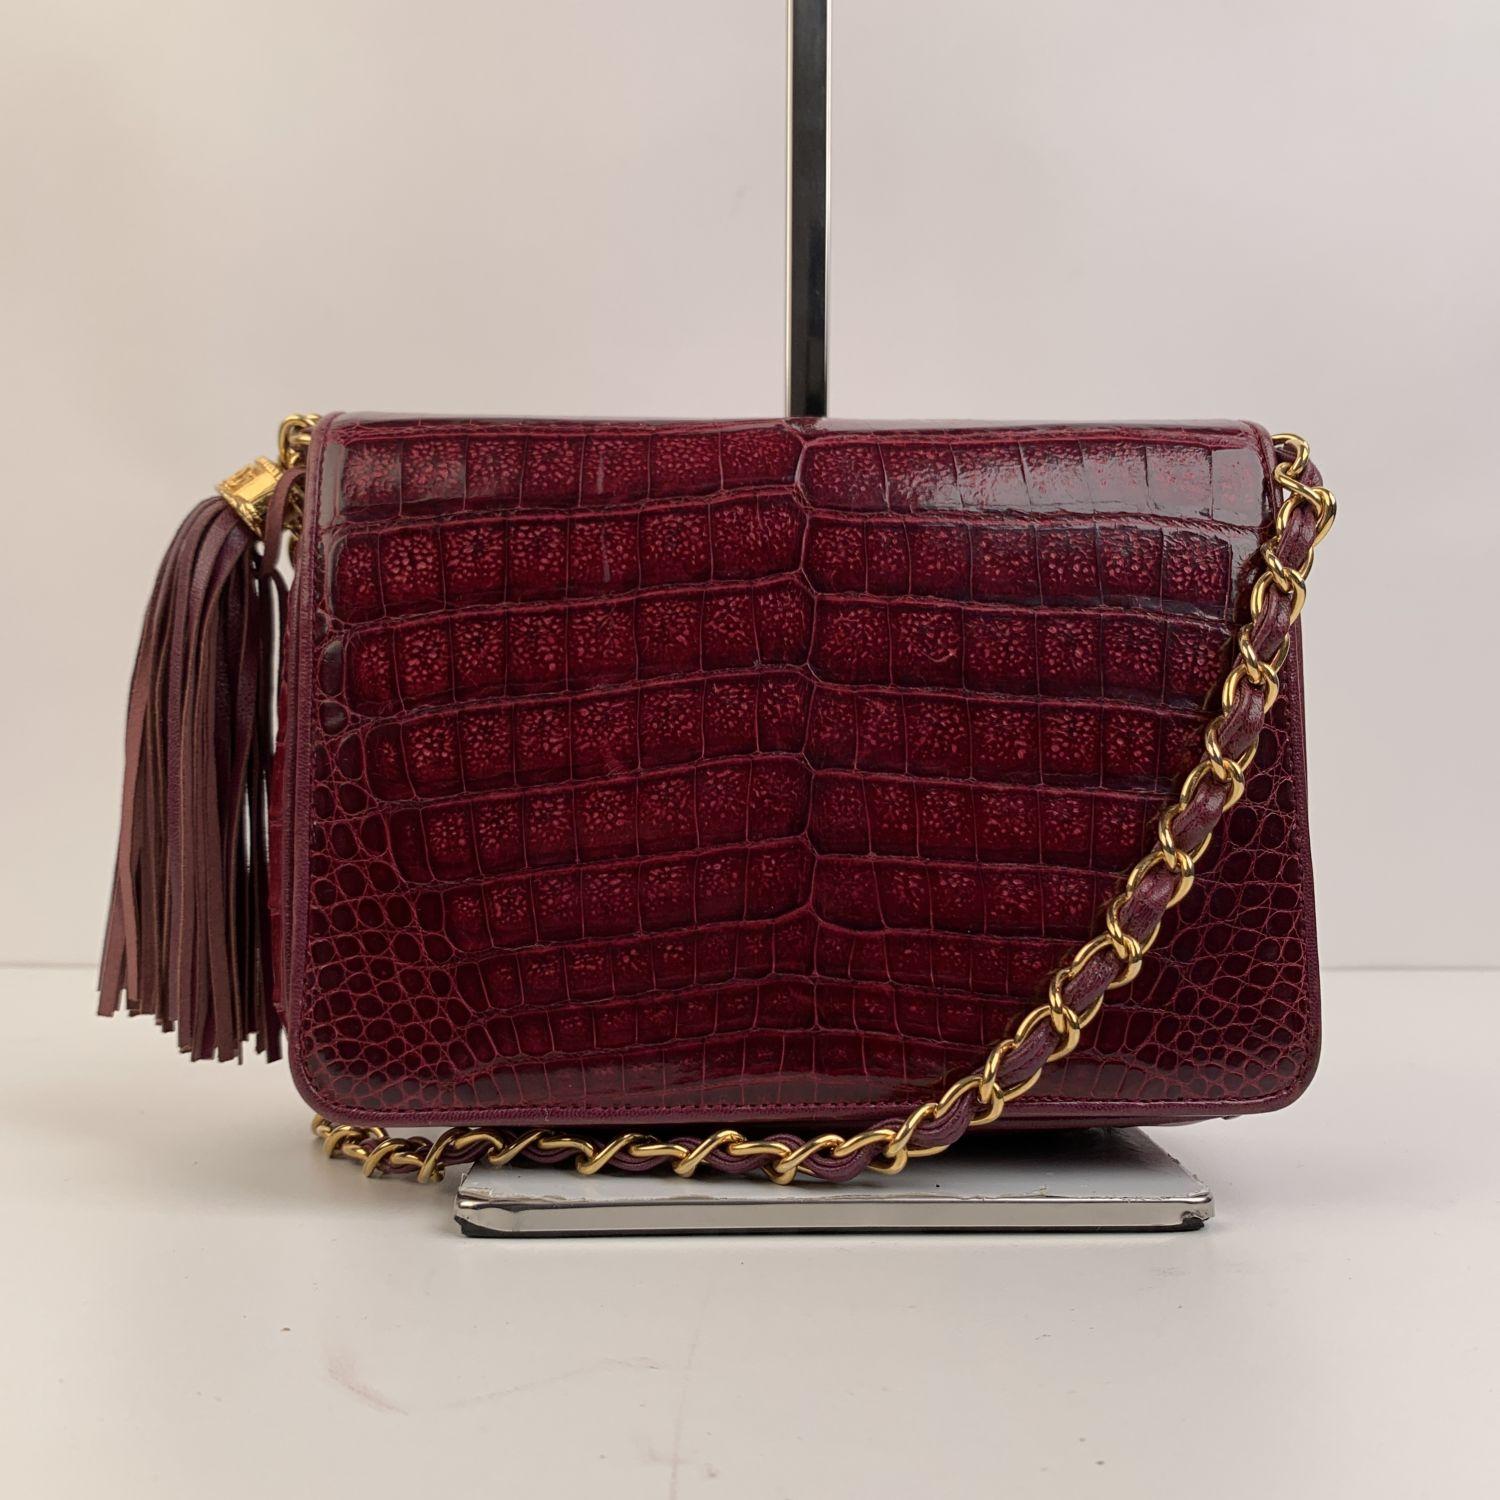 This beautiful Bag will come with a Certificate of Authenticity provided by Entrupy, leading International Fashion Authenticator. The certificate will be provided at no further cost.

Elegant and rare Chanel small shoulder bag in burgundy leather.